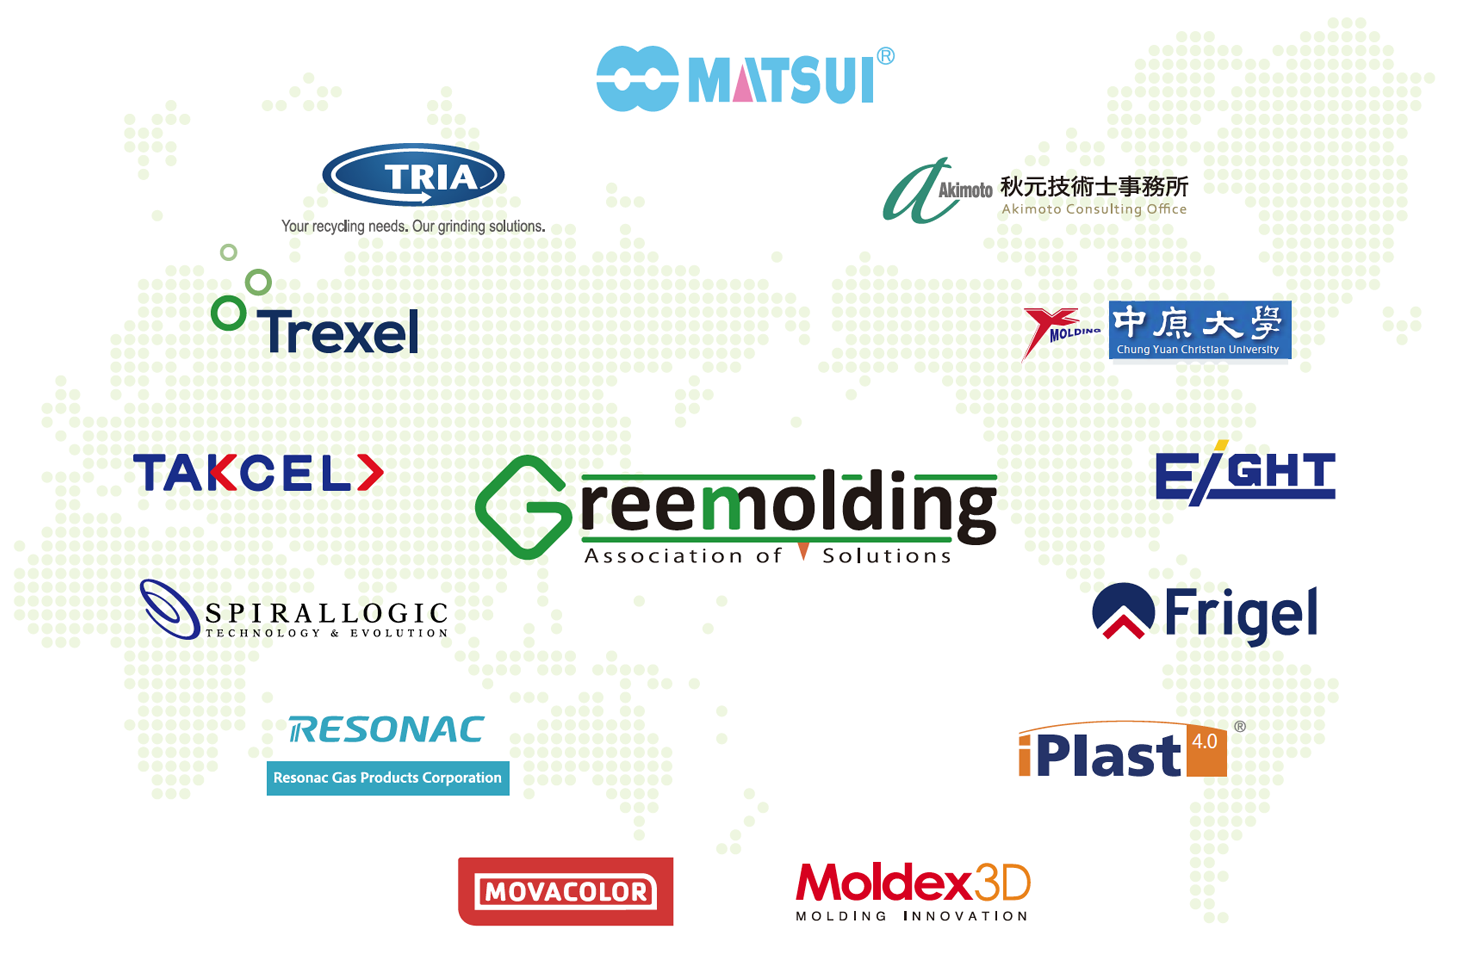 About The Association of Green Molding Solutions